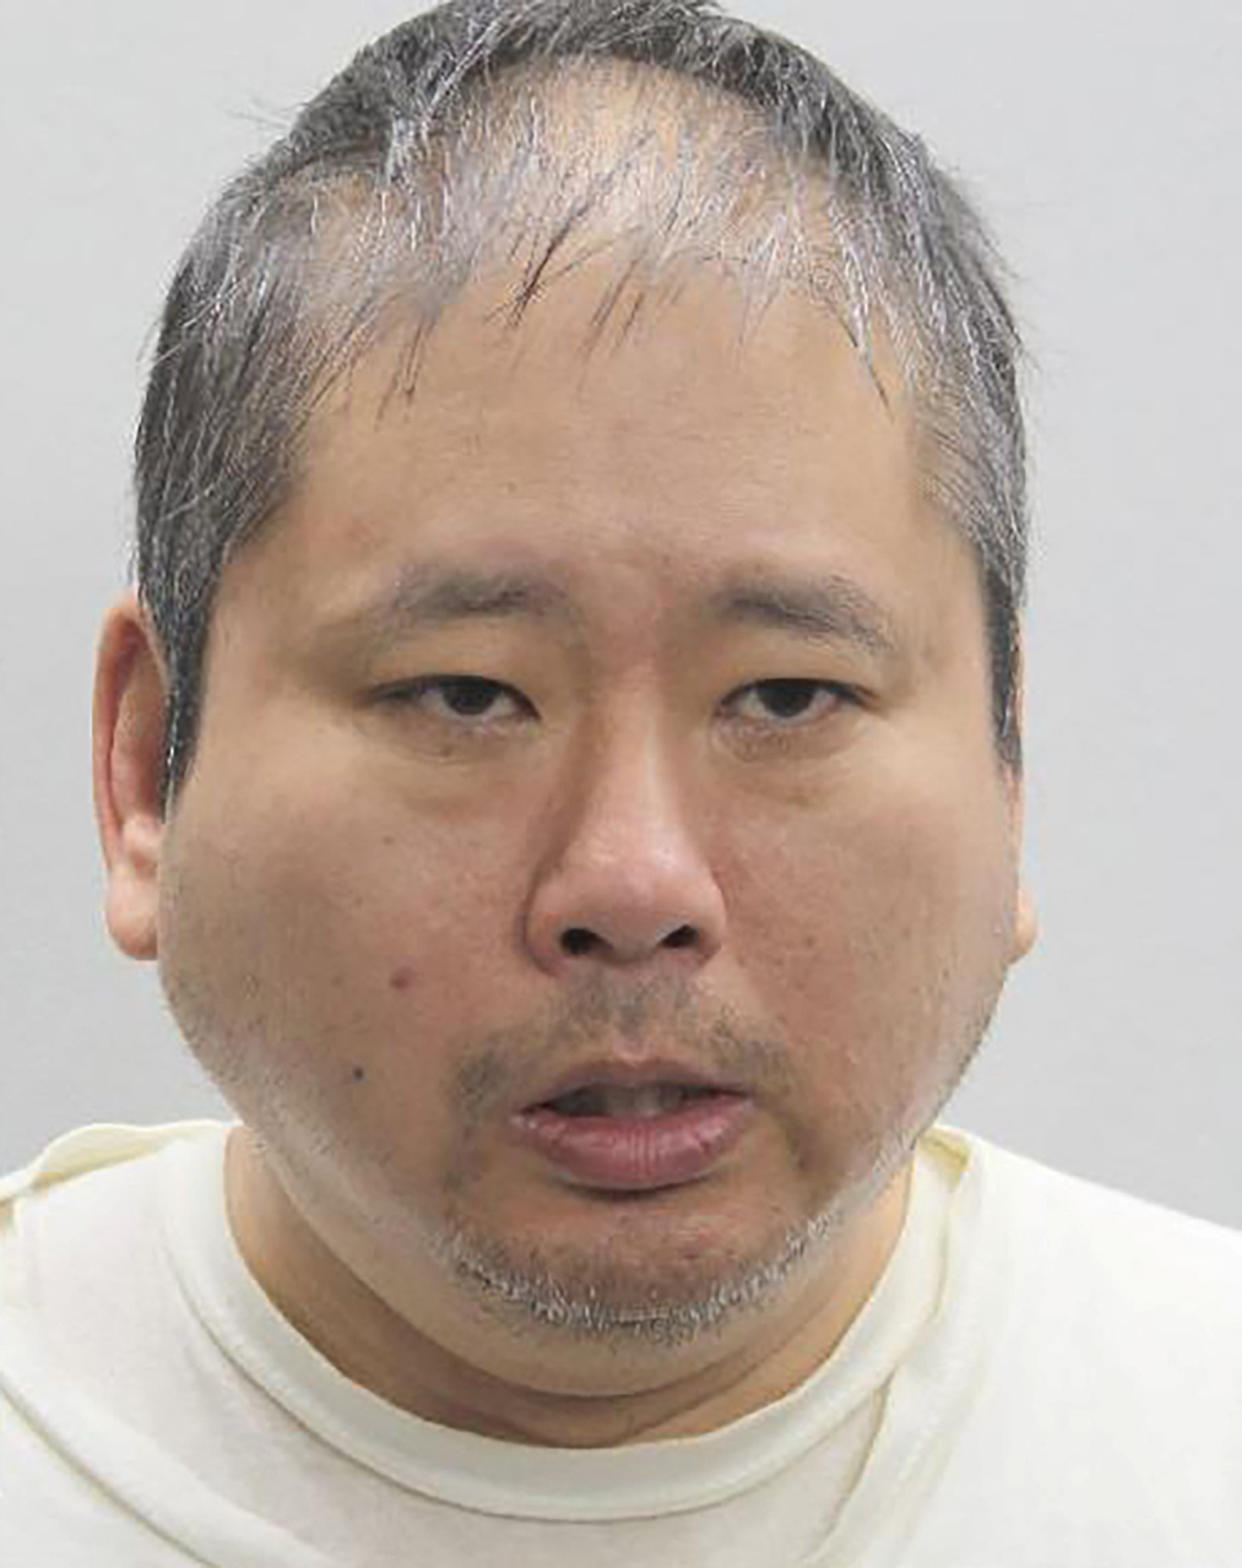 Xuan Kha Tran Pham, 49, appears in a booking photograph after his arrest on suspicion of attacking two staff members in Rep. Gerry Connolly's district office in Fairfax, Va., Monday. 